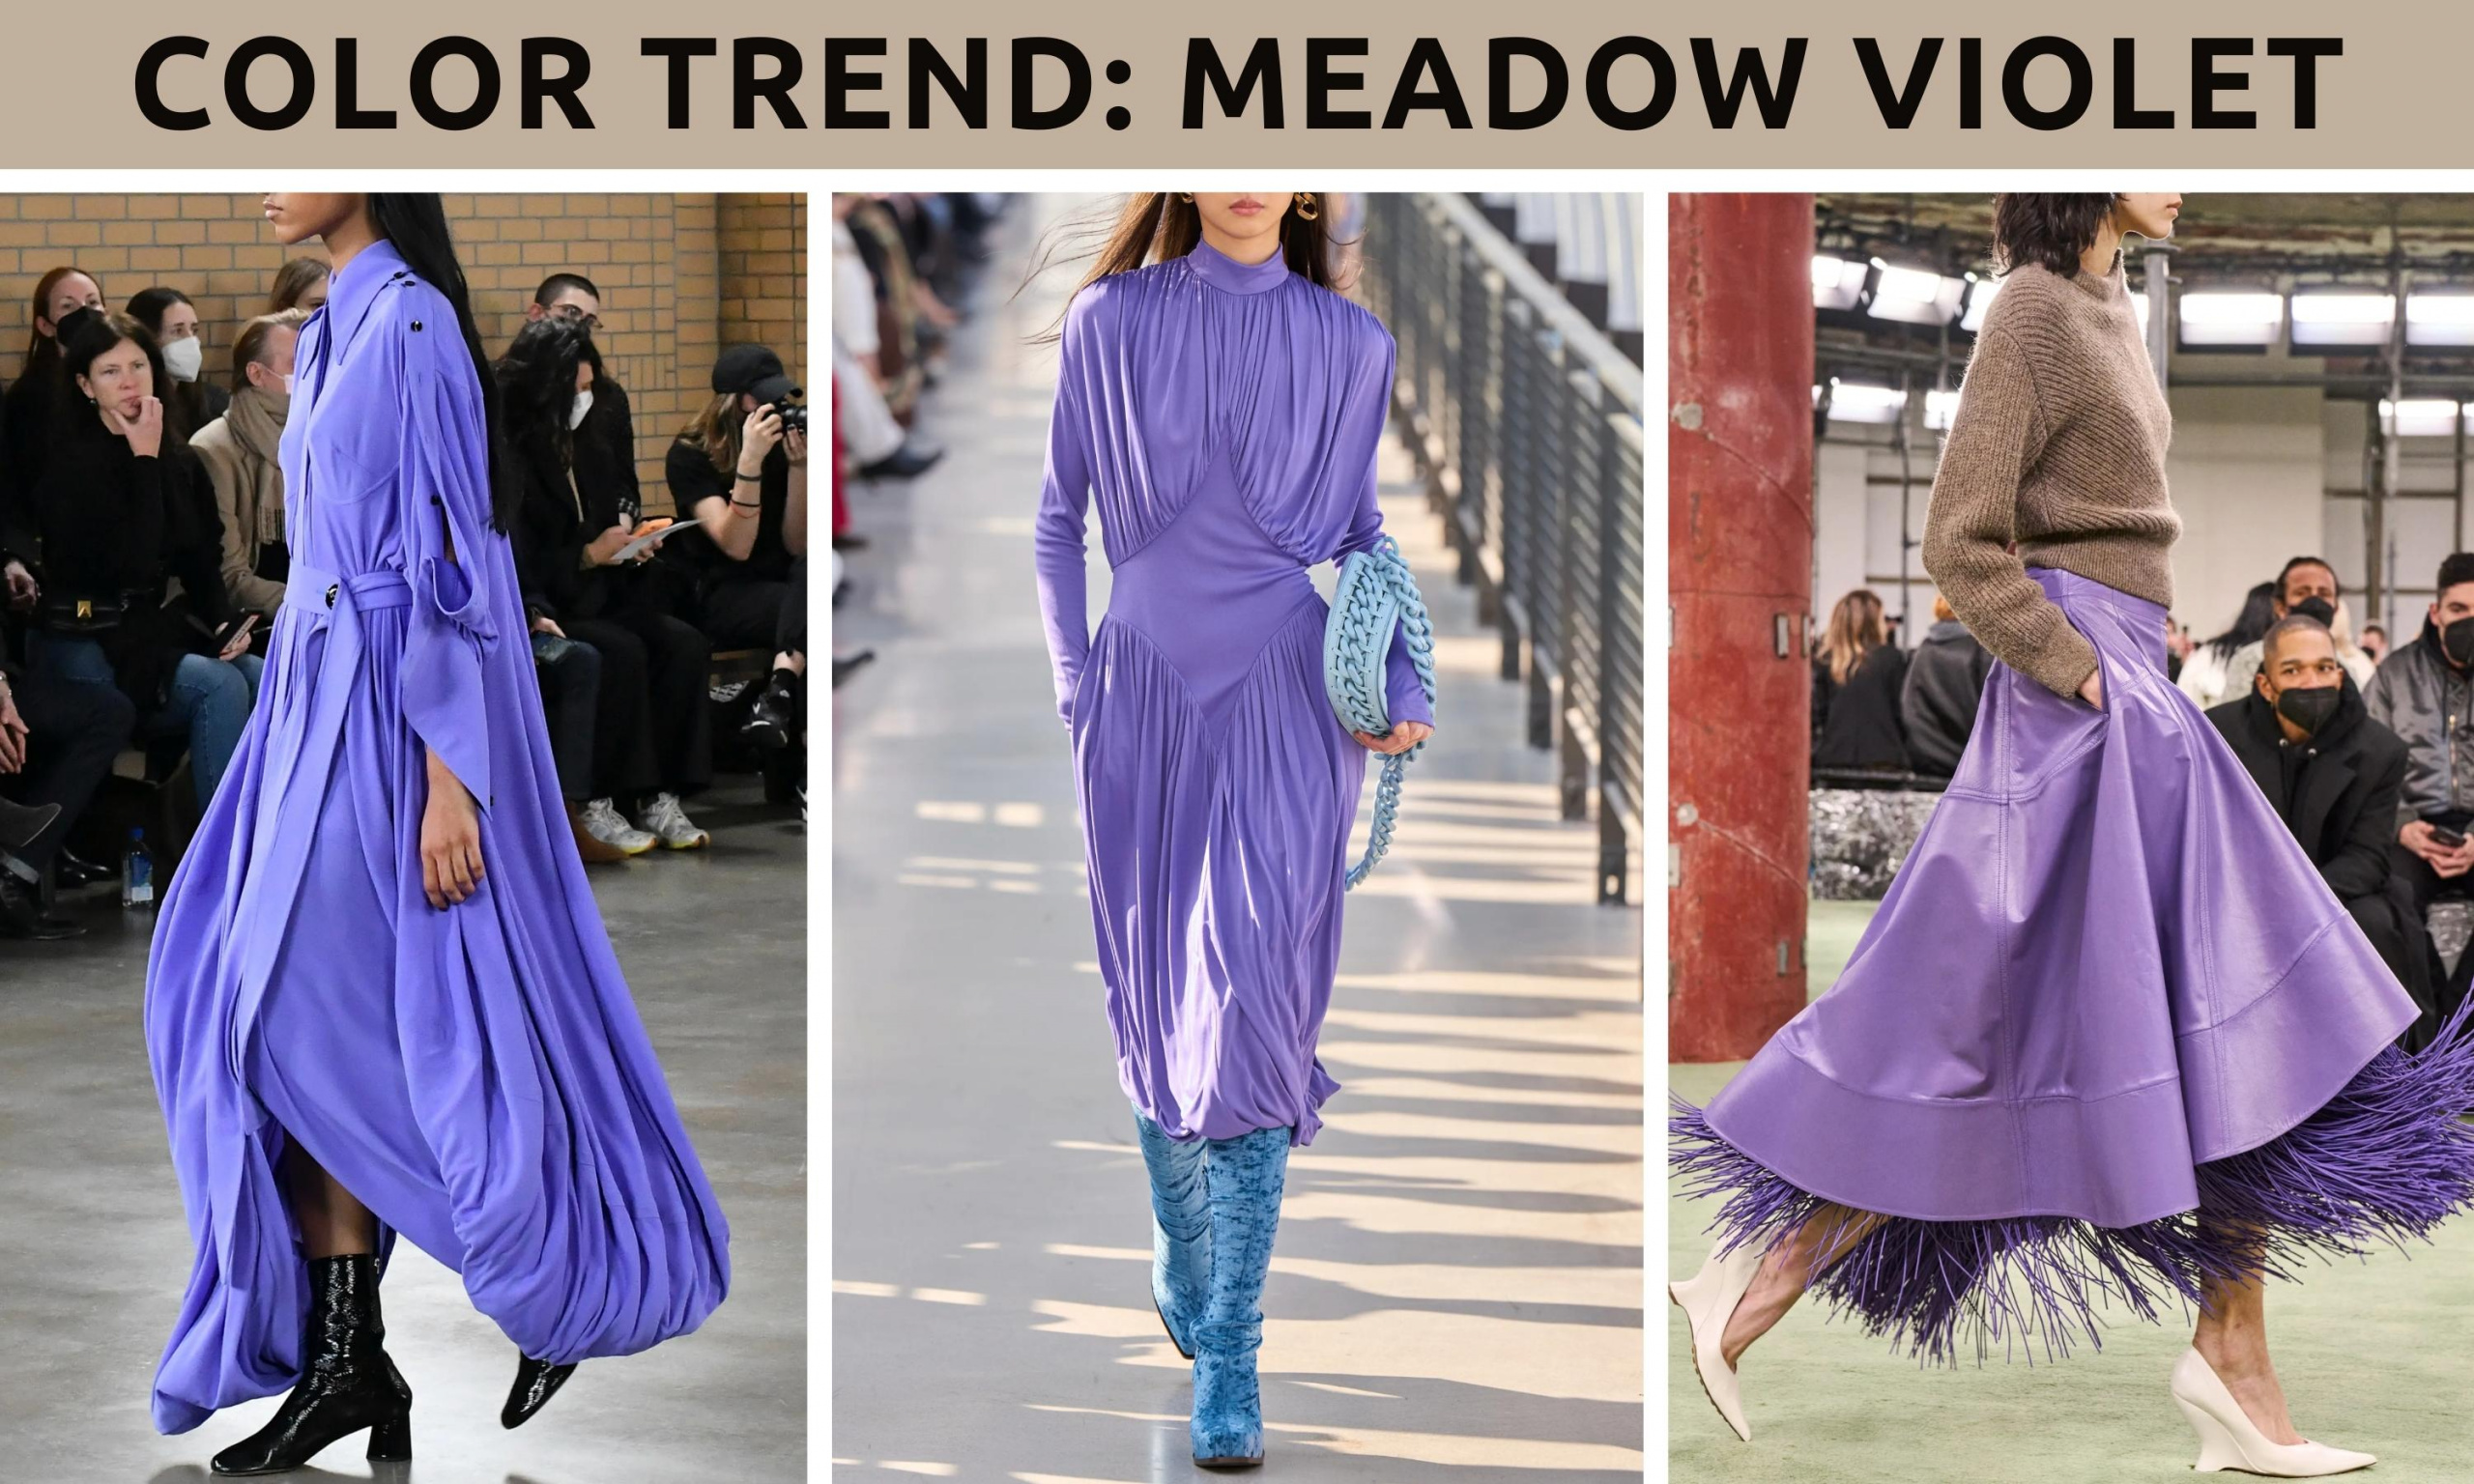 wearable fall trends, fall fashion trends, fall trends, wearable trends, how to wear trends, trends over 40, wearing trends over 40, 2022 fall fashion trends, 2022 wearable fall trends, 2022 color trends, meadow violet, on-trend purple color